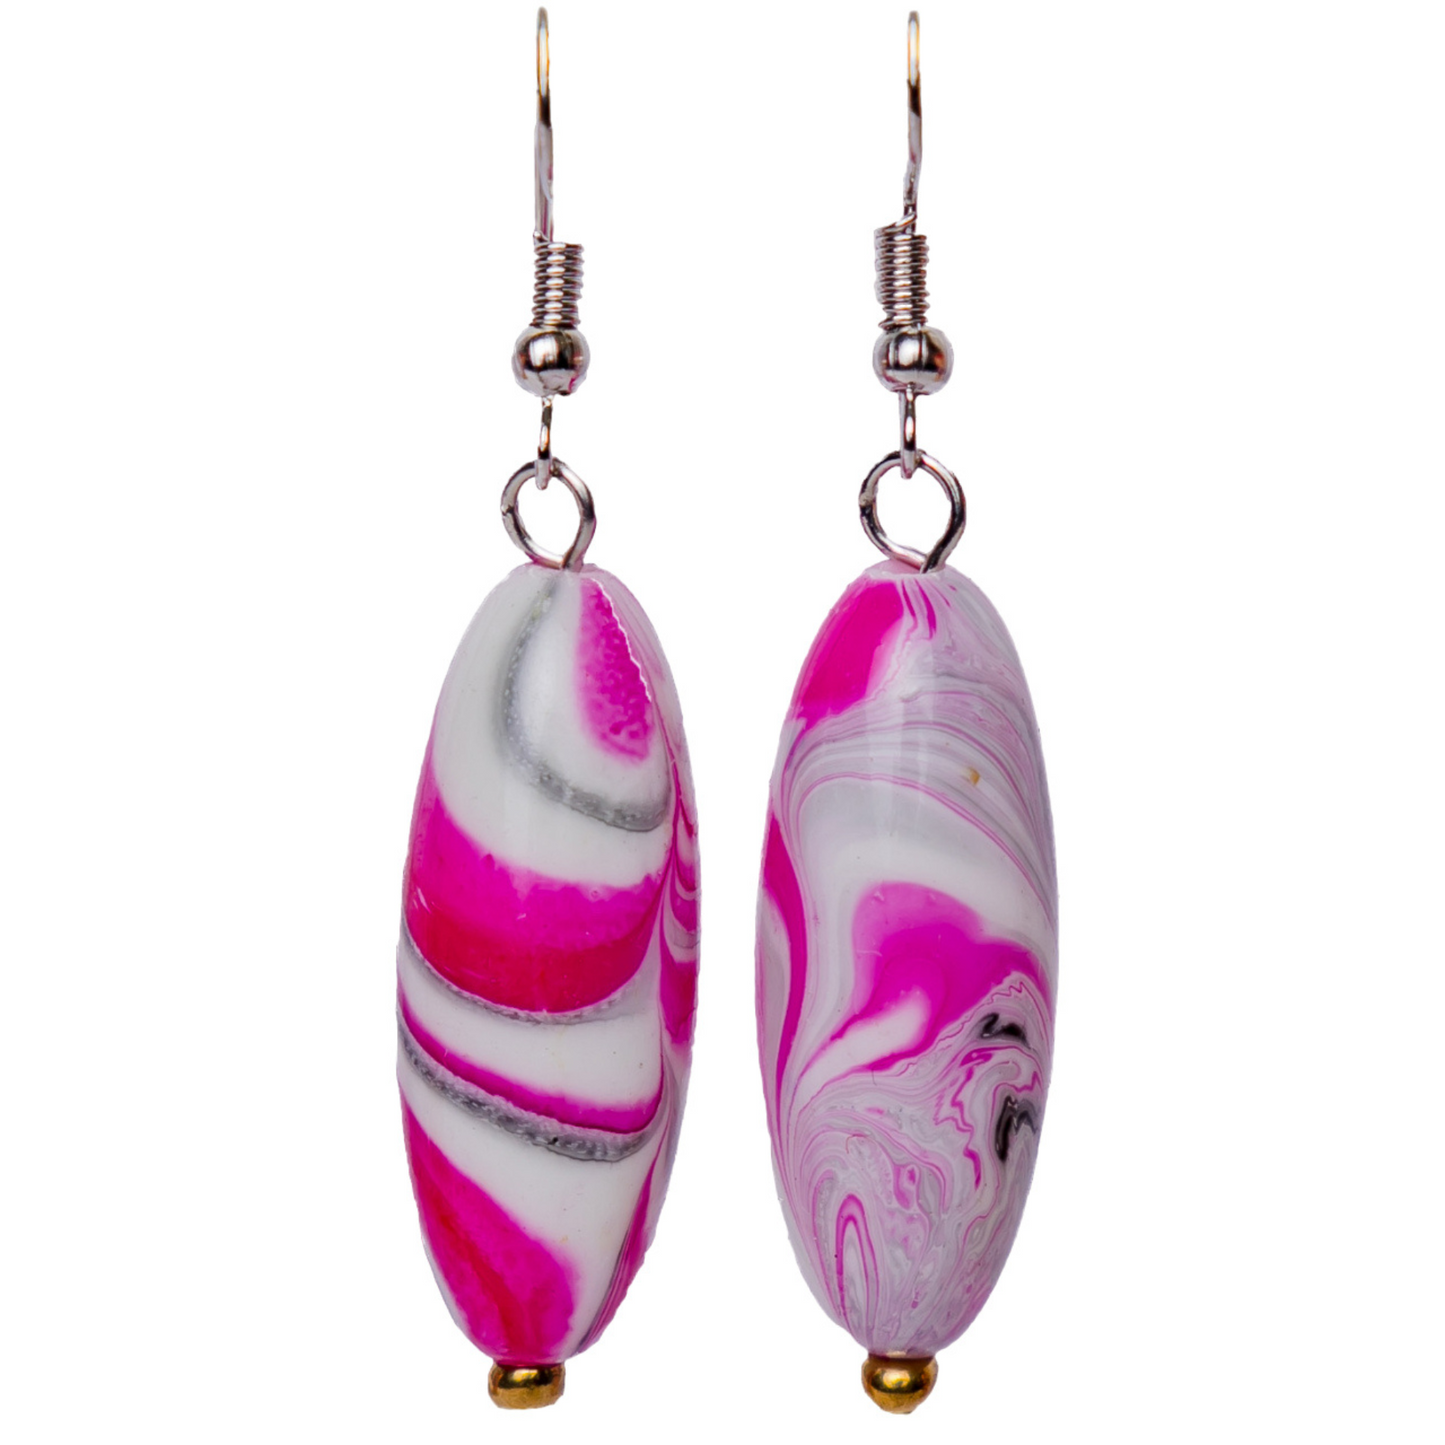 Pink mismatched earrings. Each earring has a unique print.